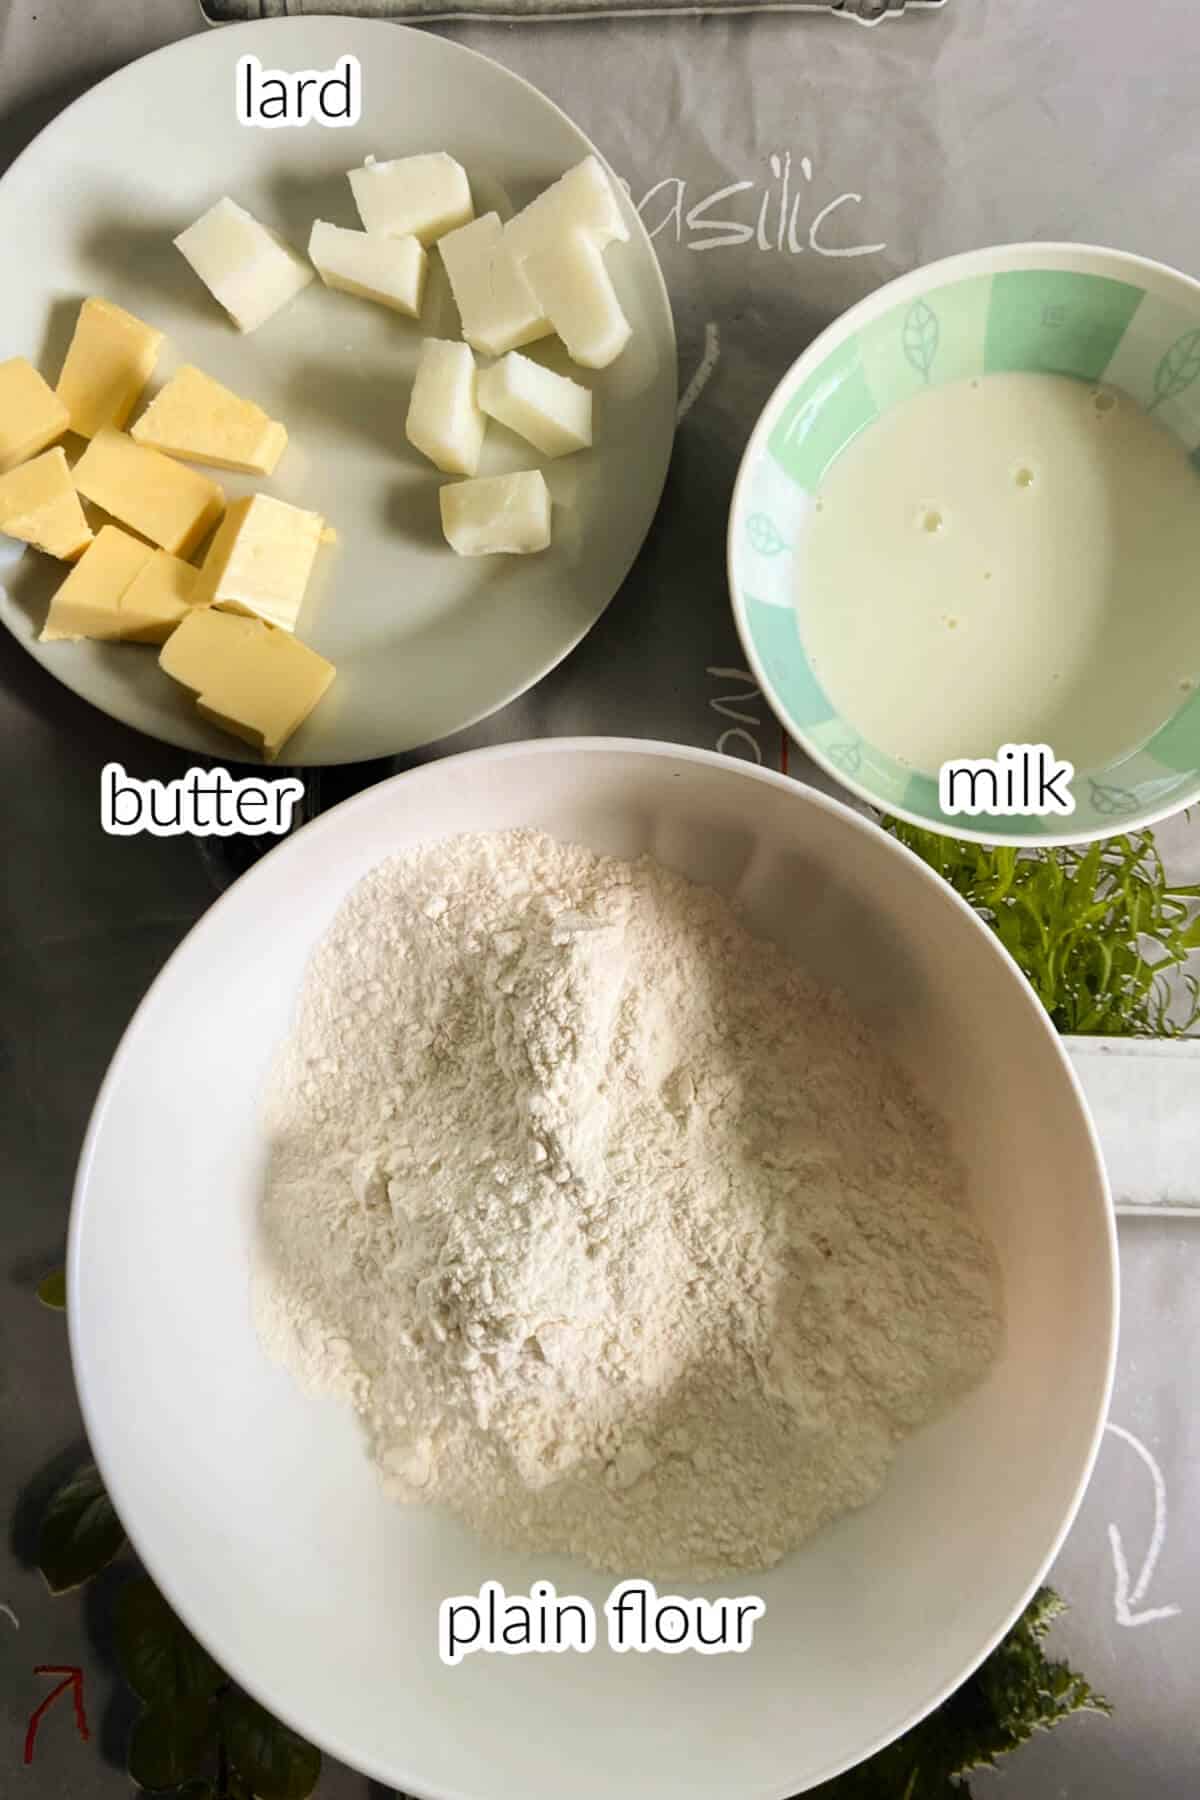 Ingredients used to make Coronation quiche.